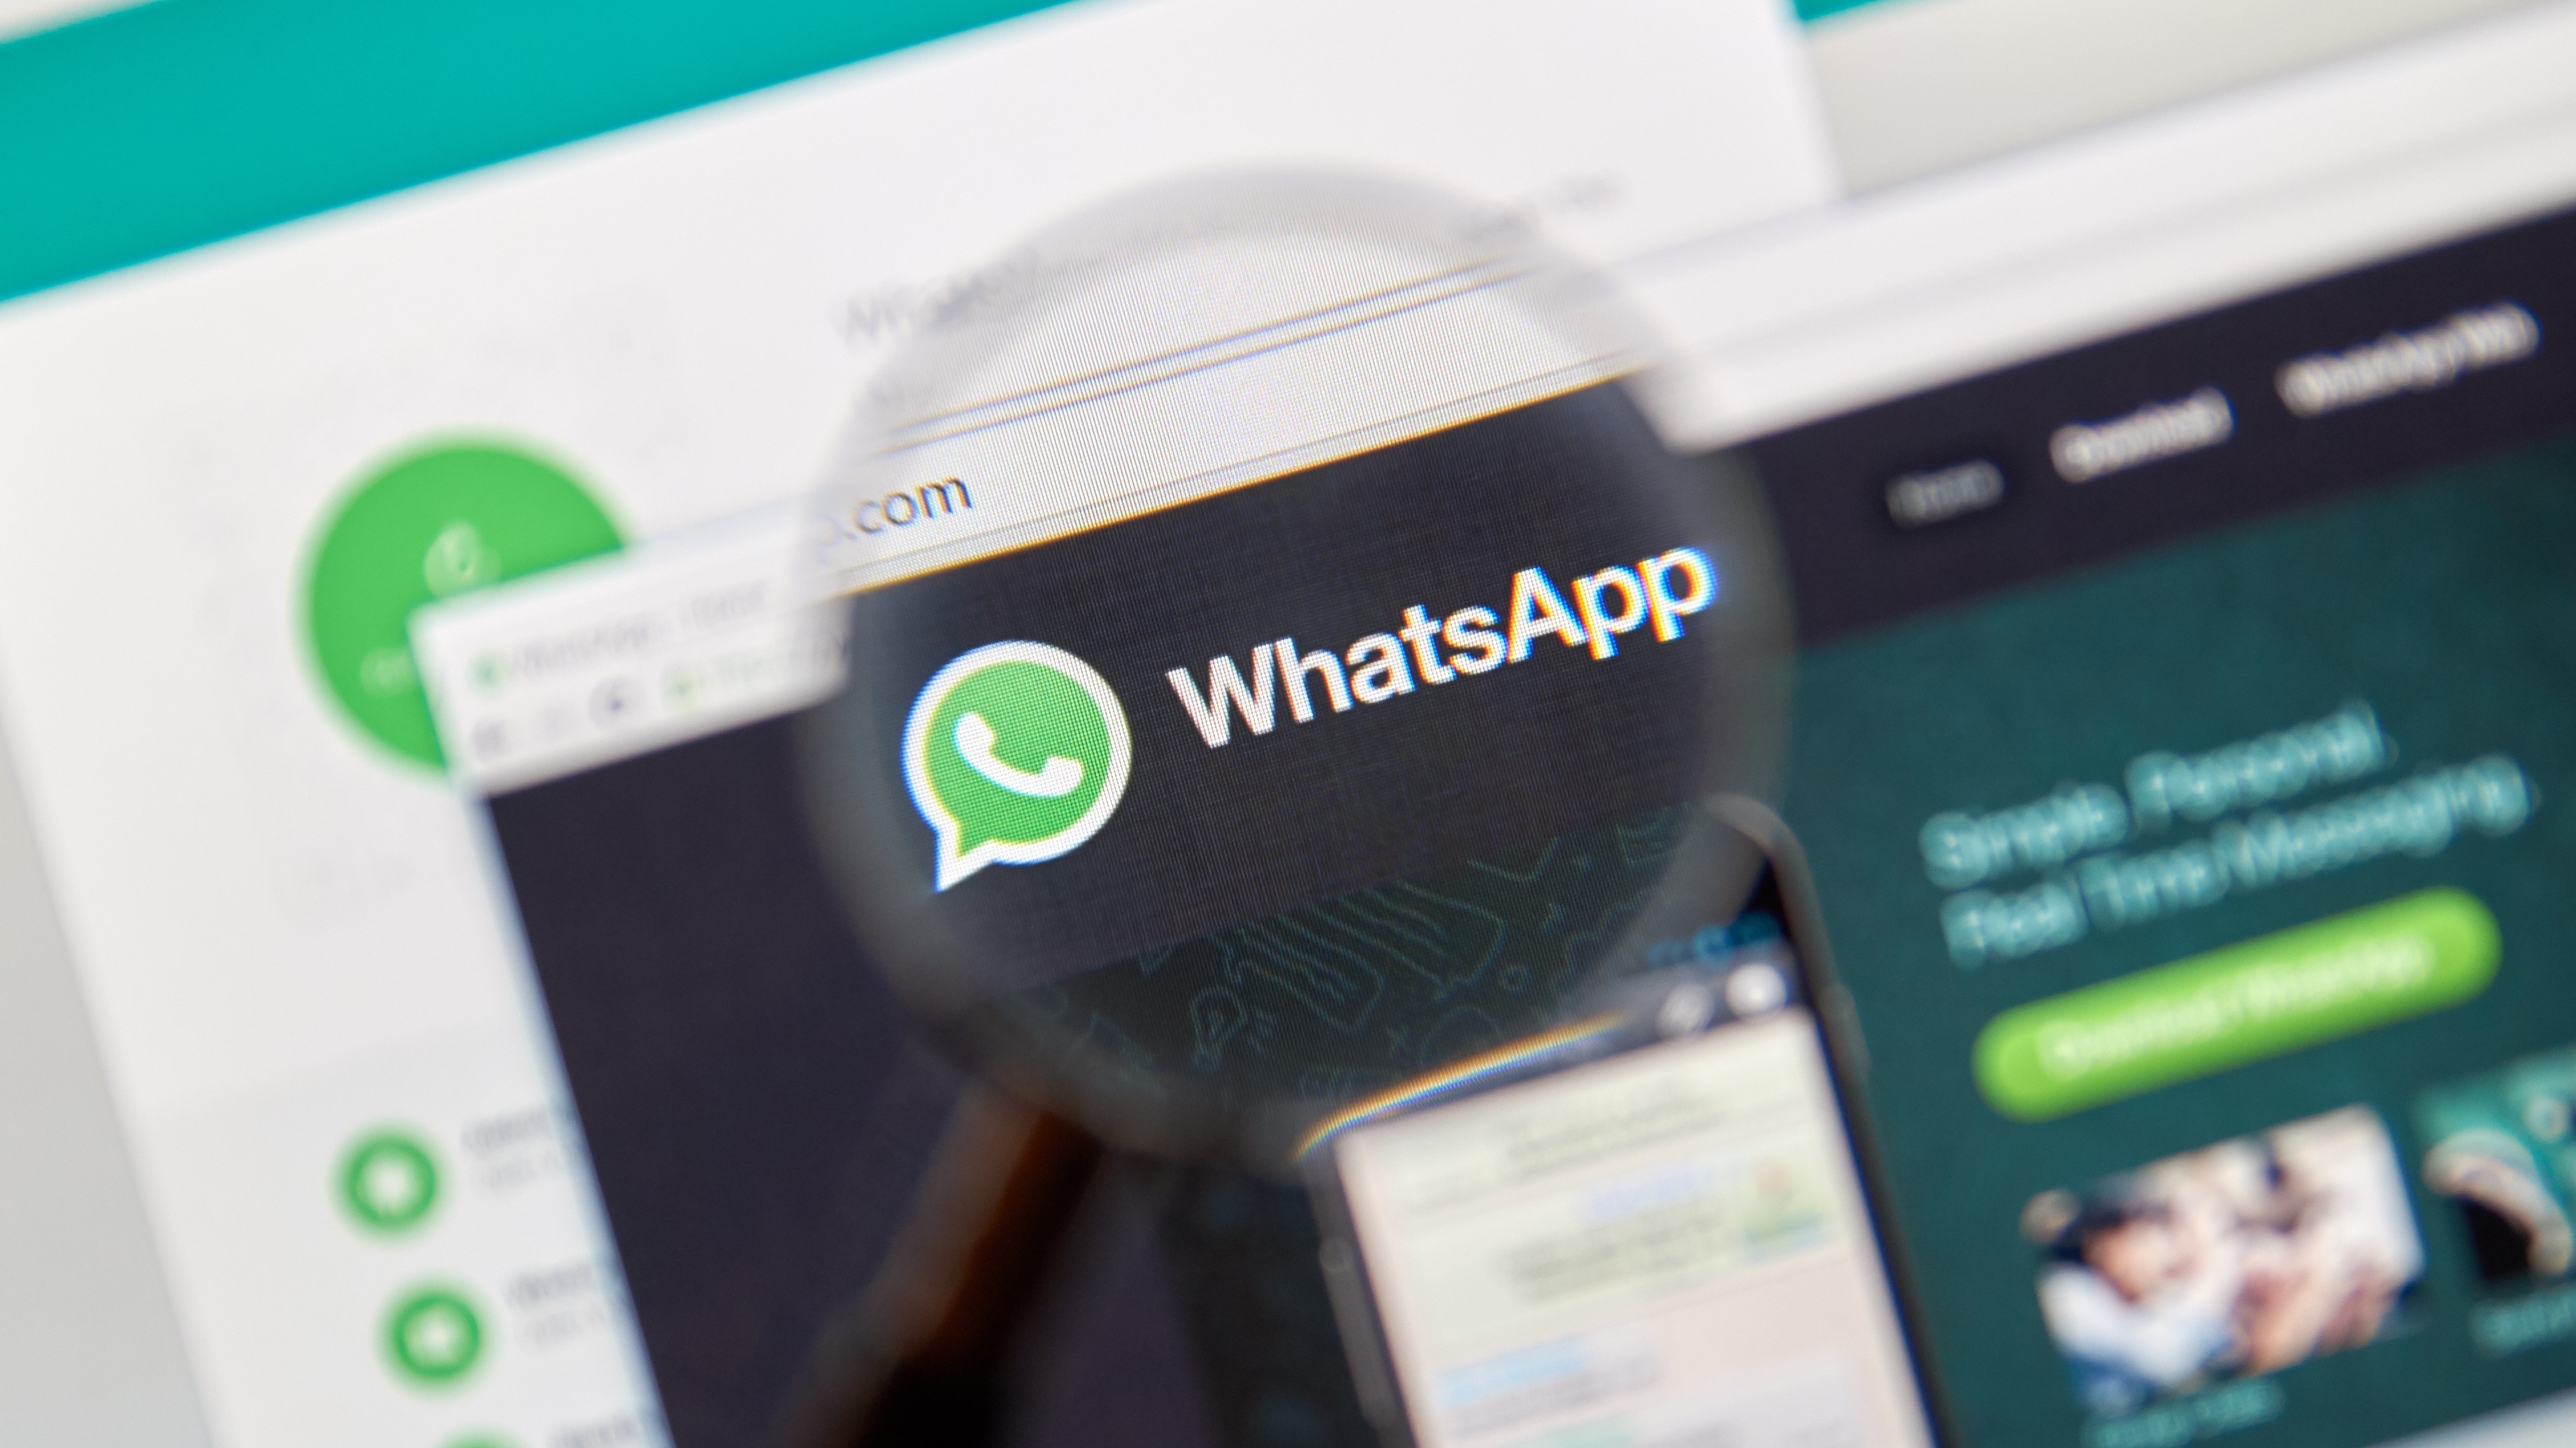 Whatsapp S New Privacy Policy Requires You To Share Data With Facebook Techradar